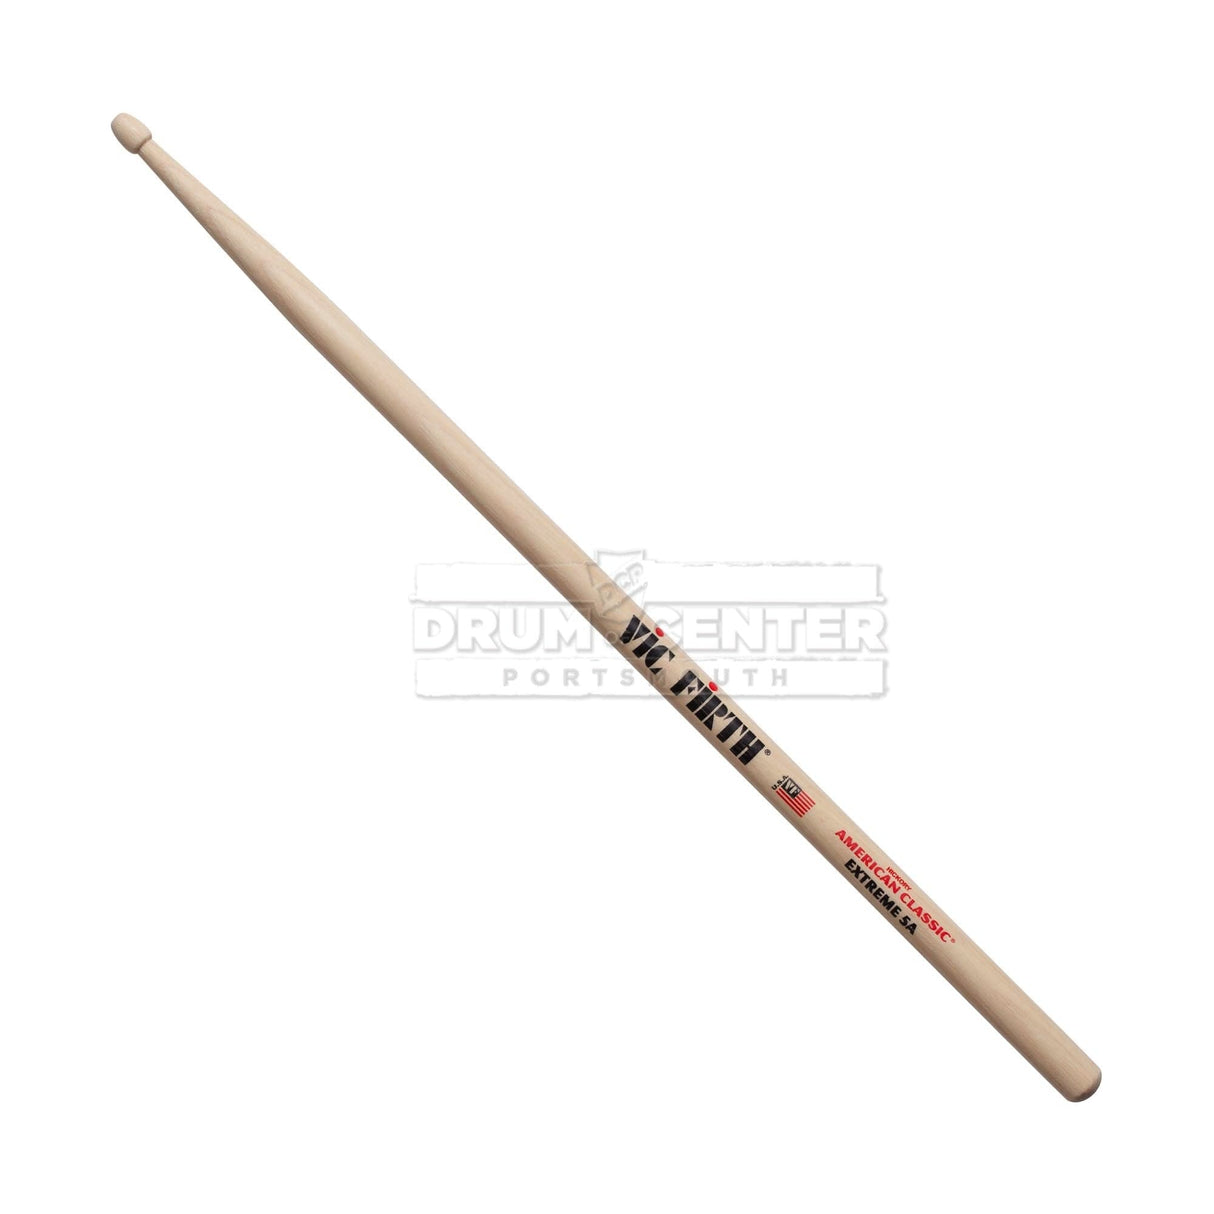 Vic Firth American Classic Drum Stick Extreme 5A